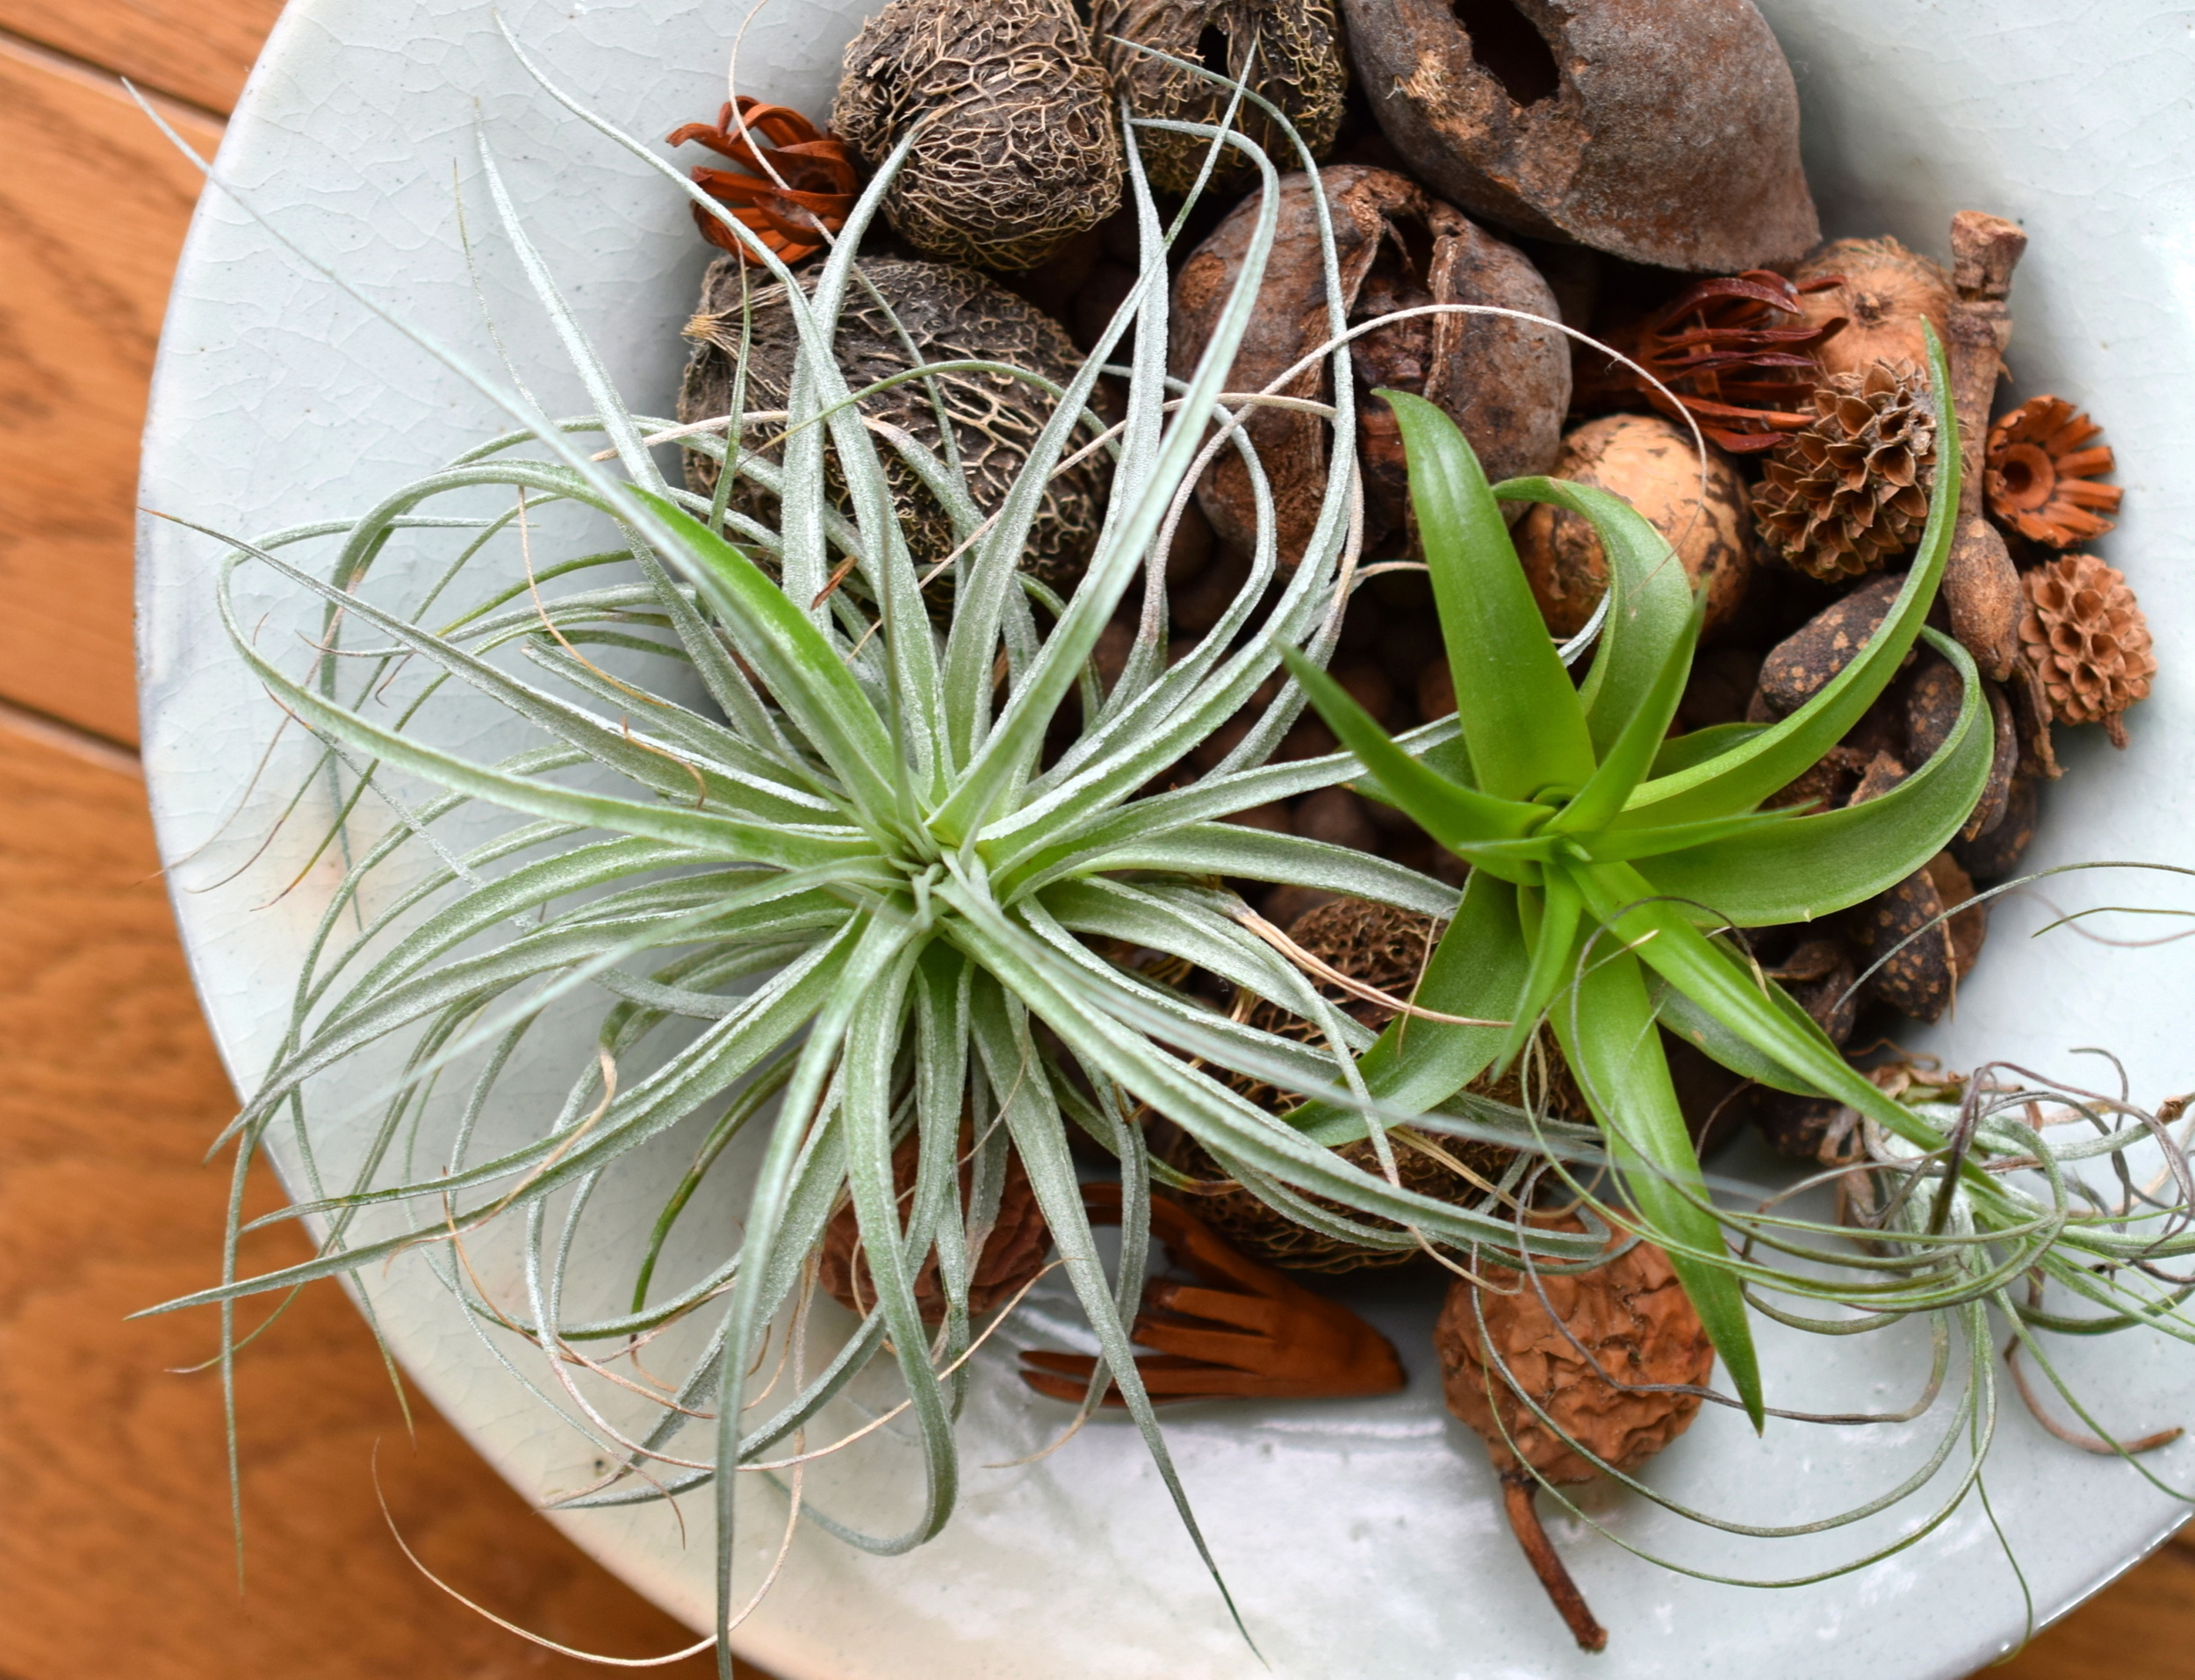 The 20 best houseplants for beginners